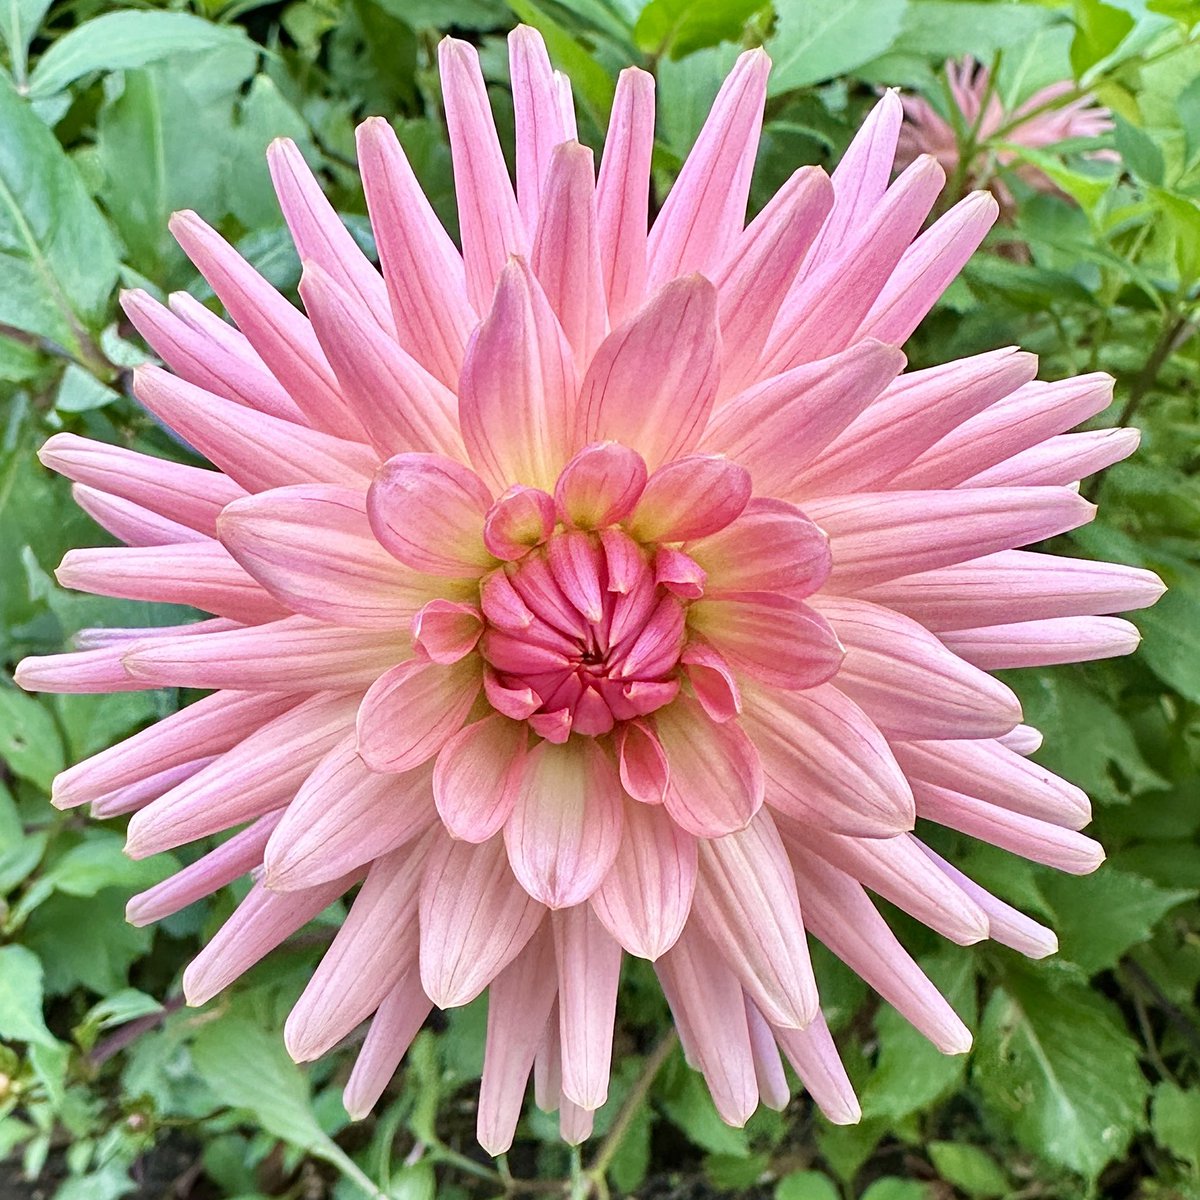 Can’t help but love this one 🩷Dahlia Preference 🌸#Flowers #Dahlialove #Gardening